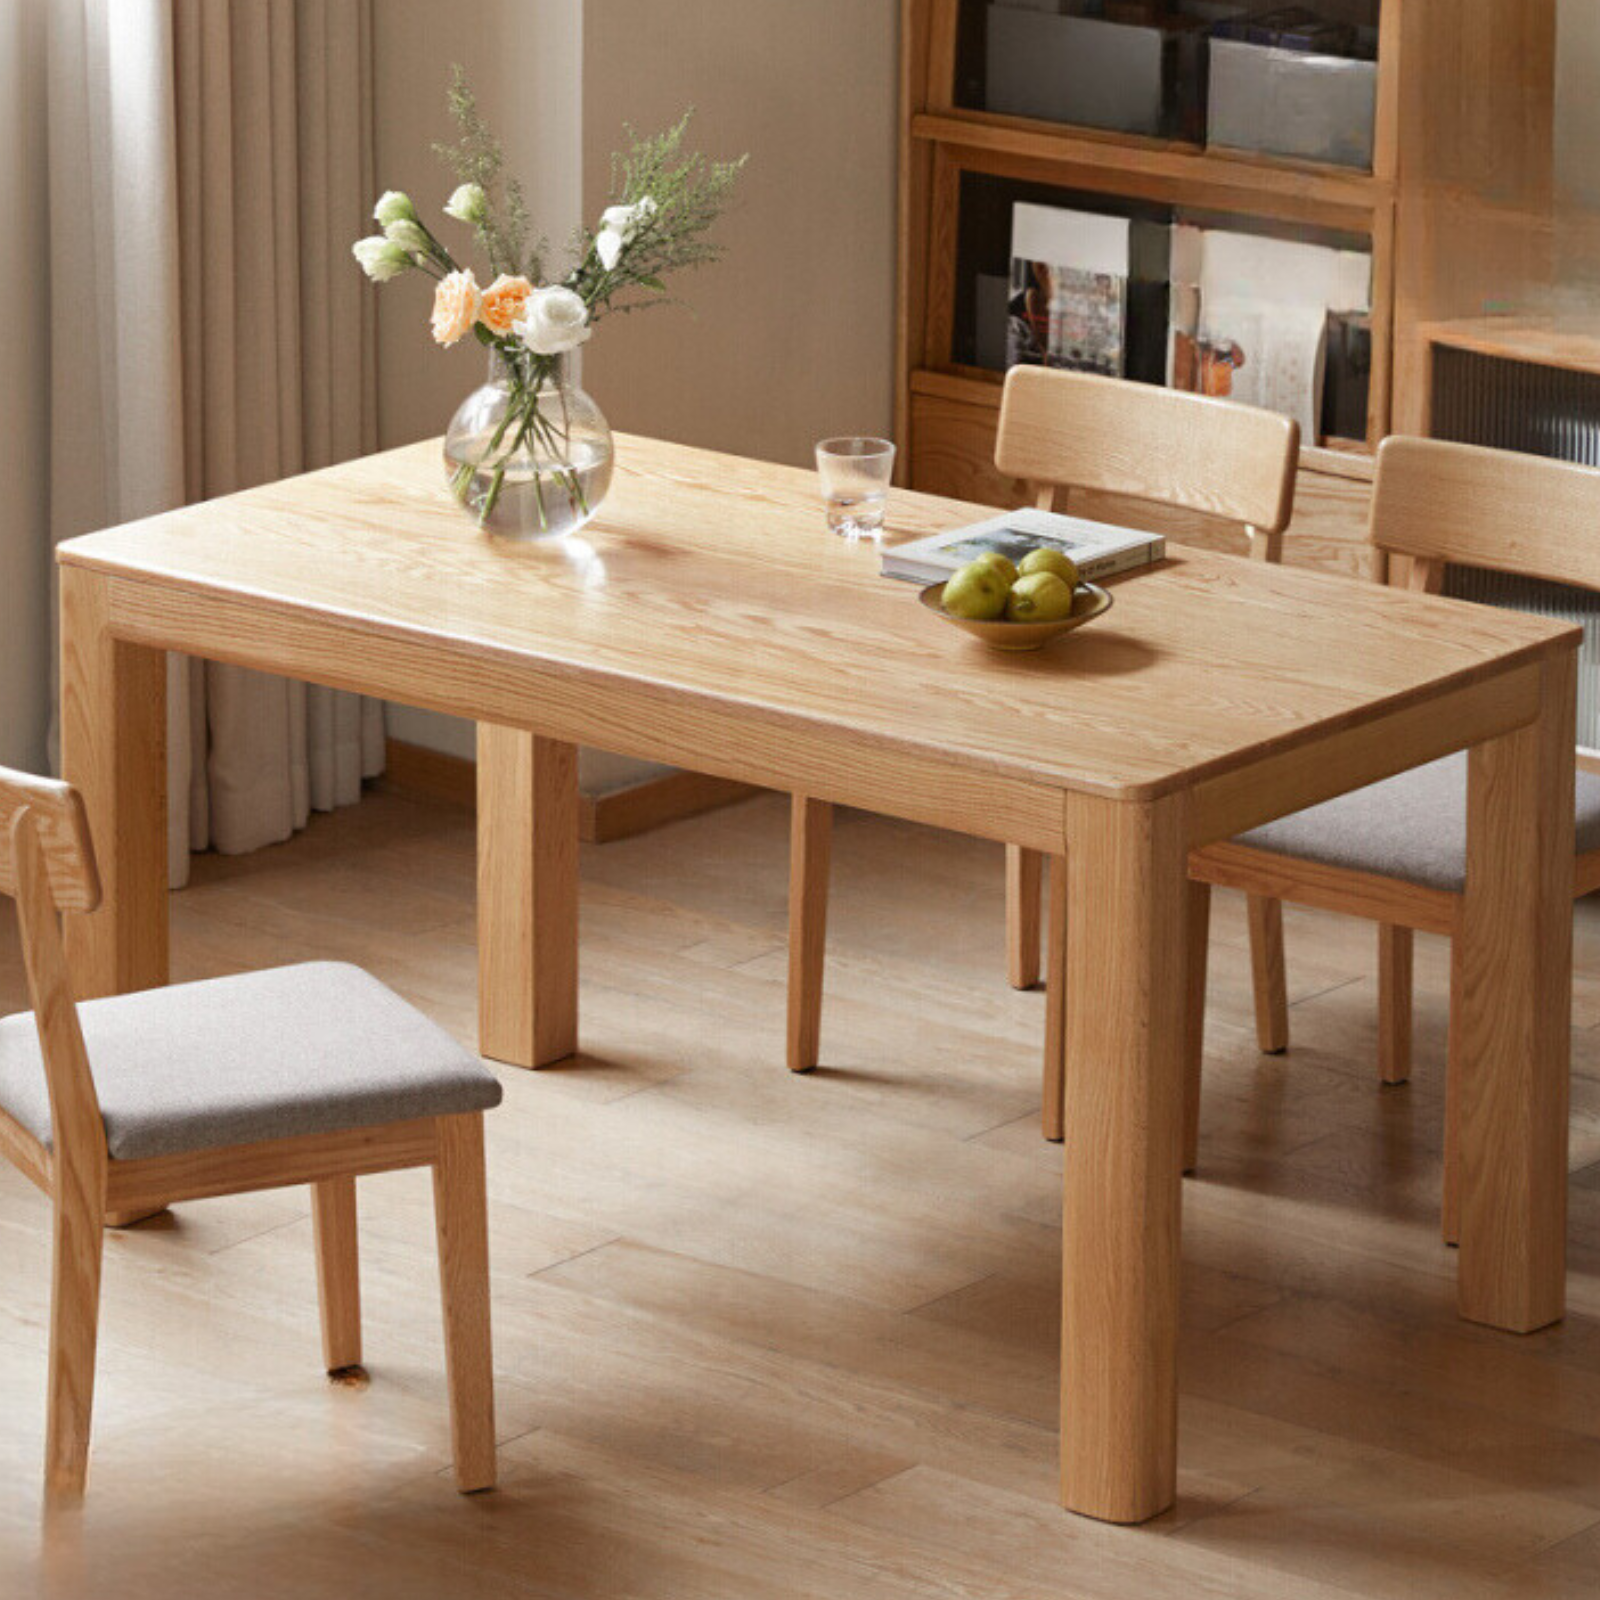 Oak Solid Wood Rectangular Dining Table, One Table and Four Chairs-